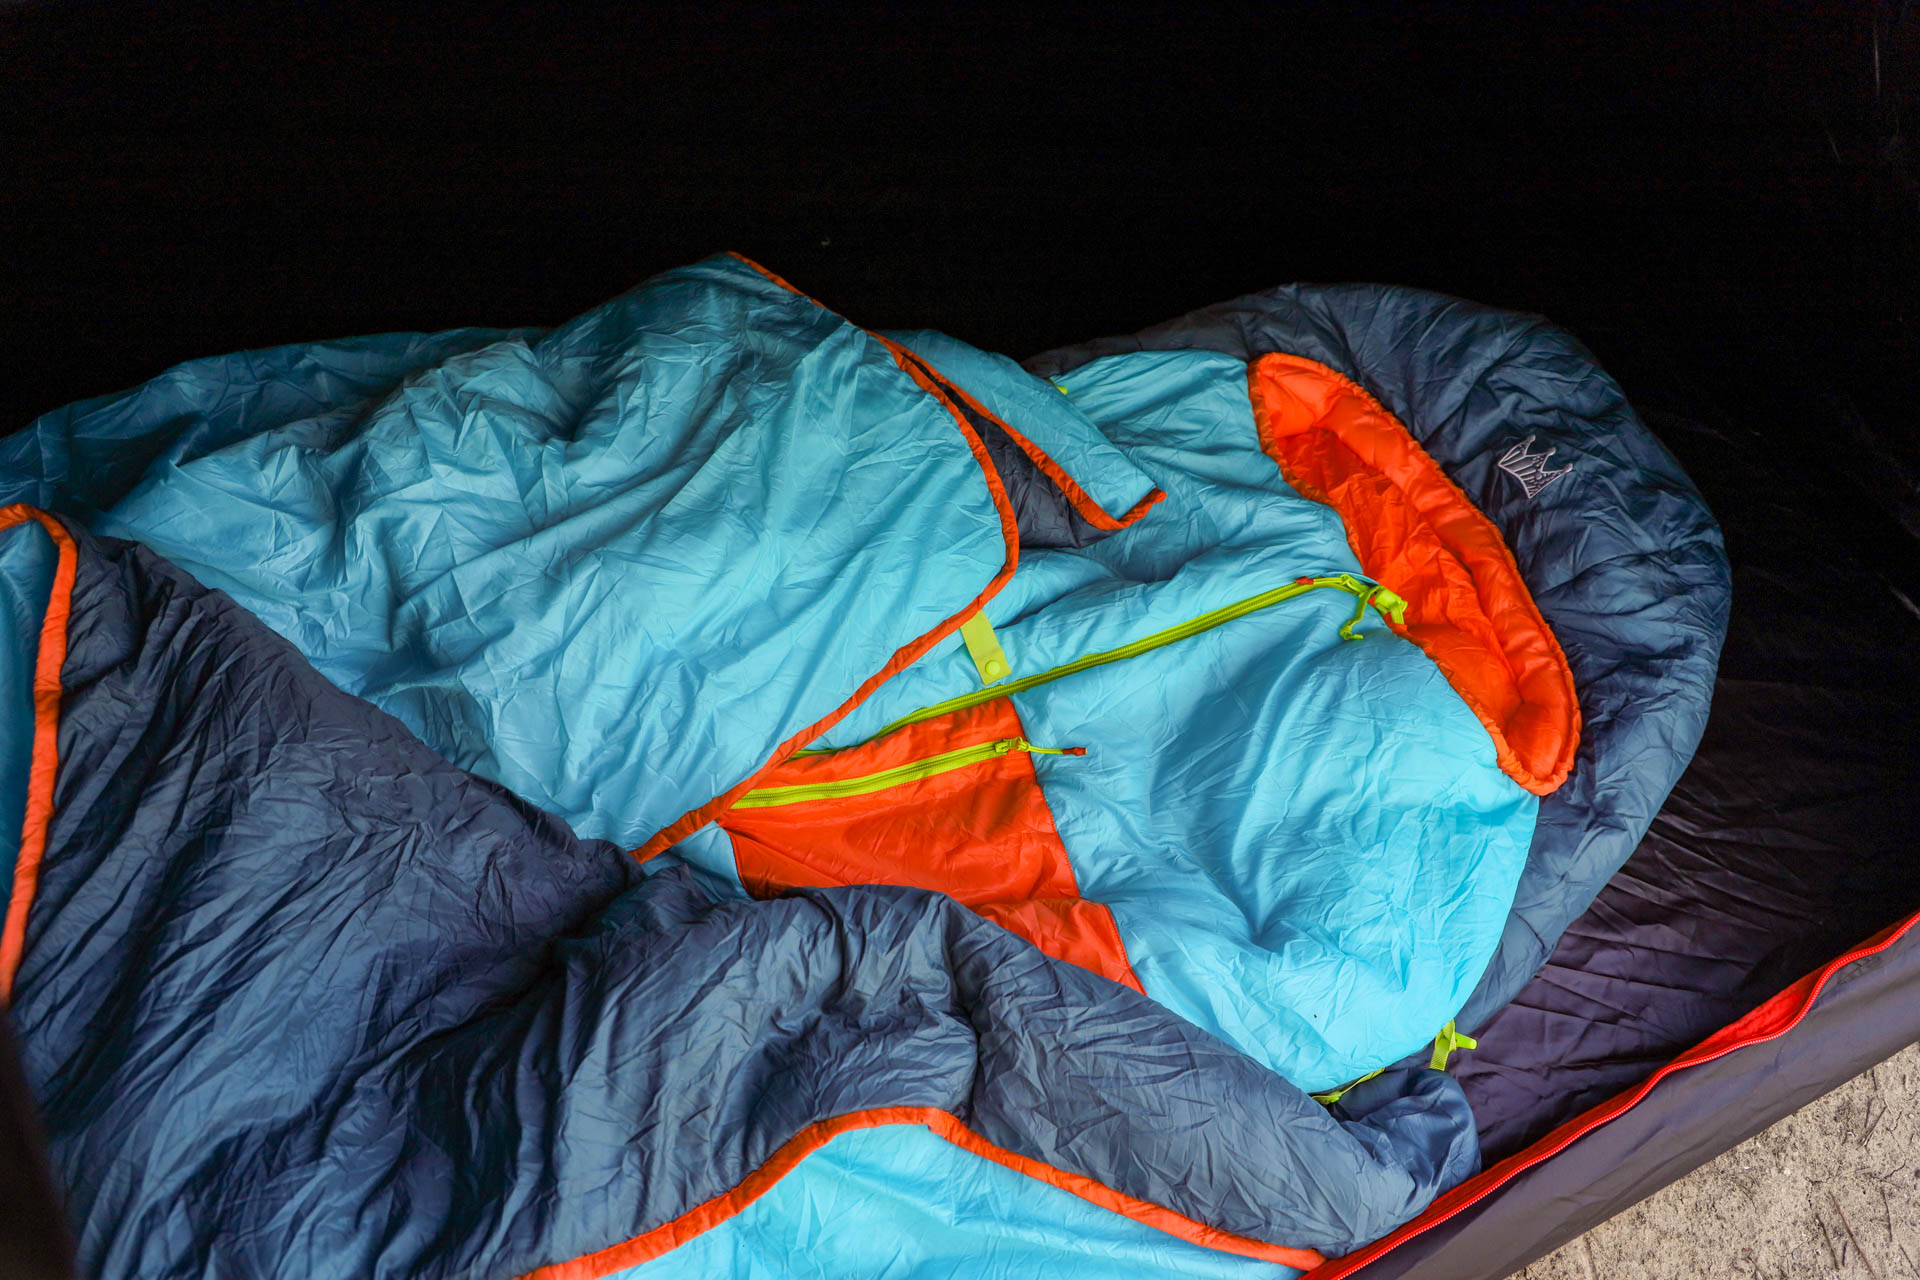 UST Monarch Review: the colorful Monarch sleeping bag